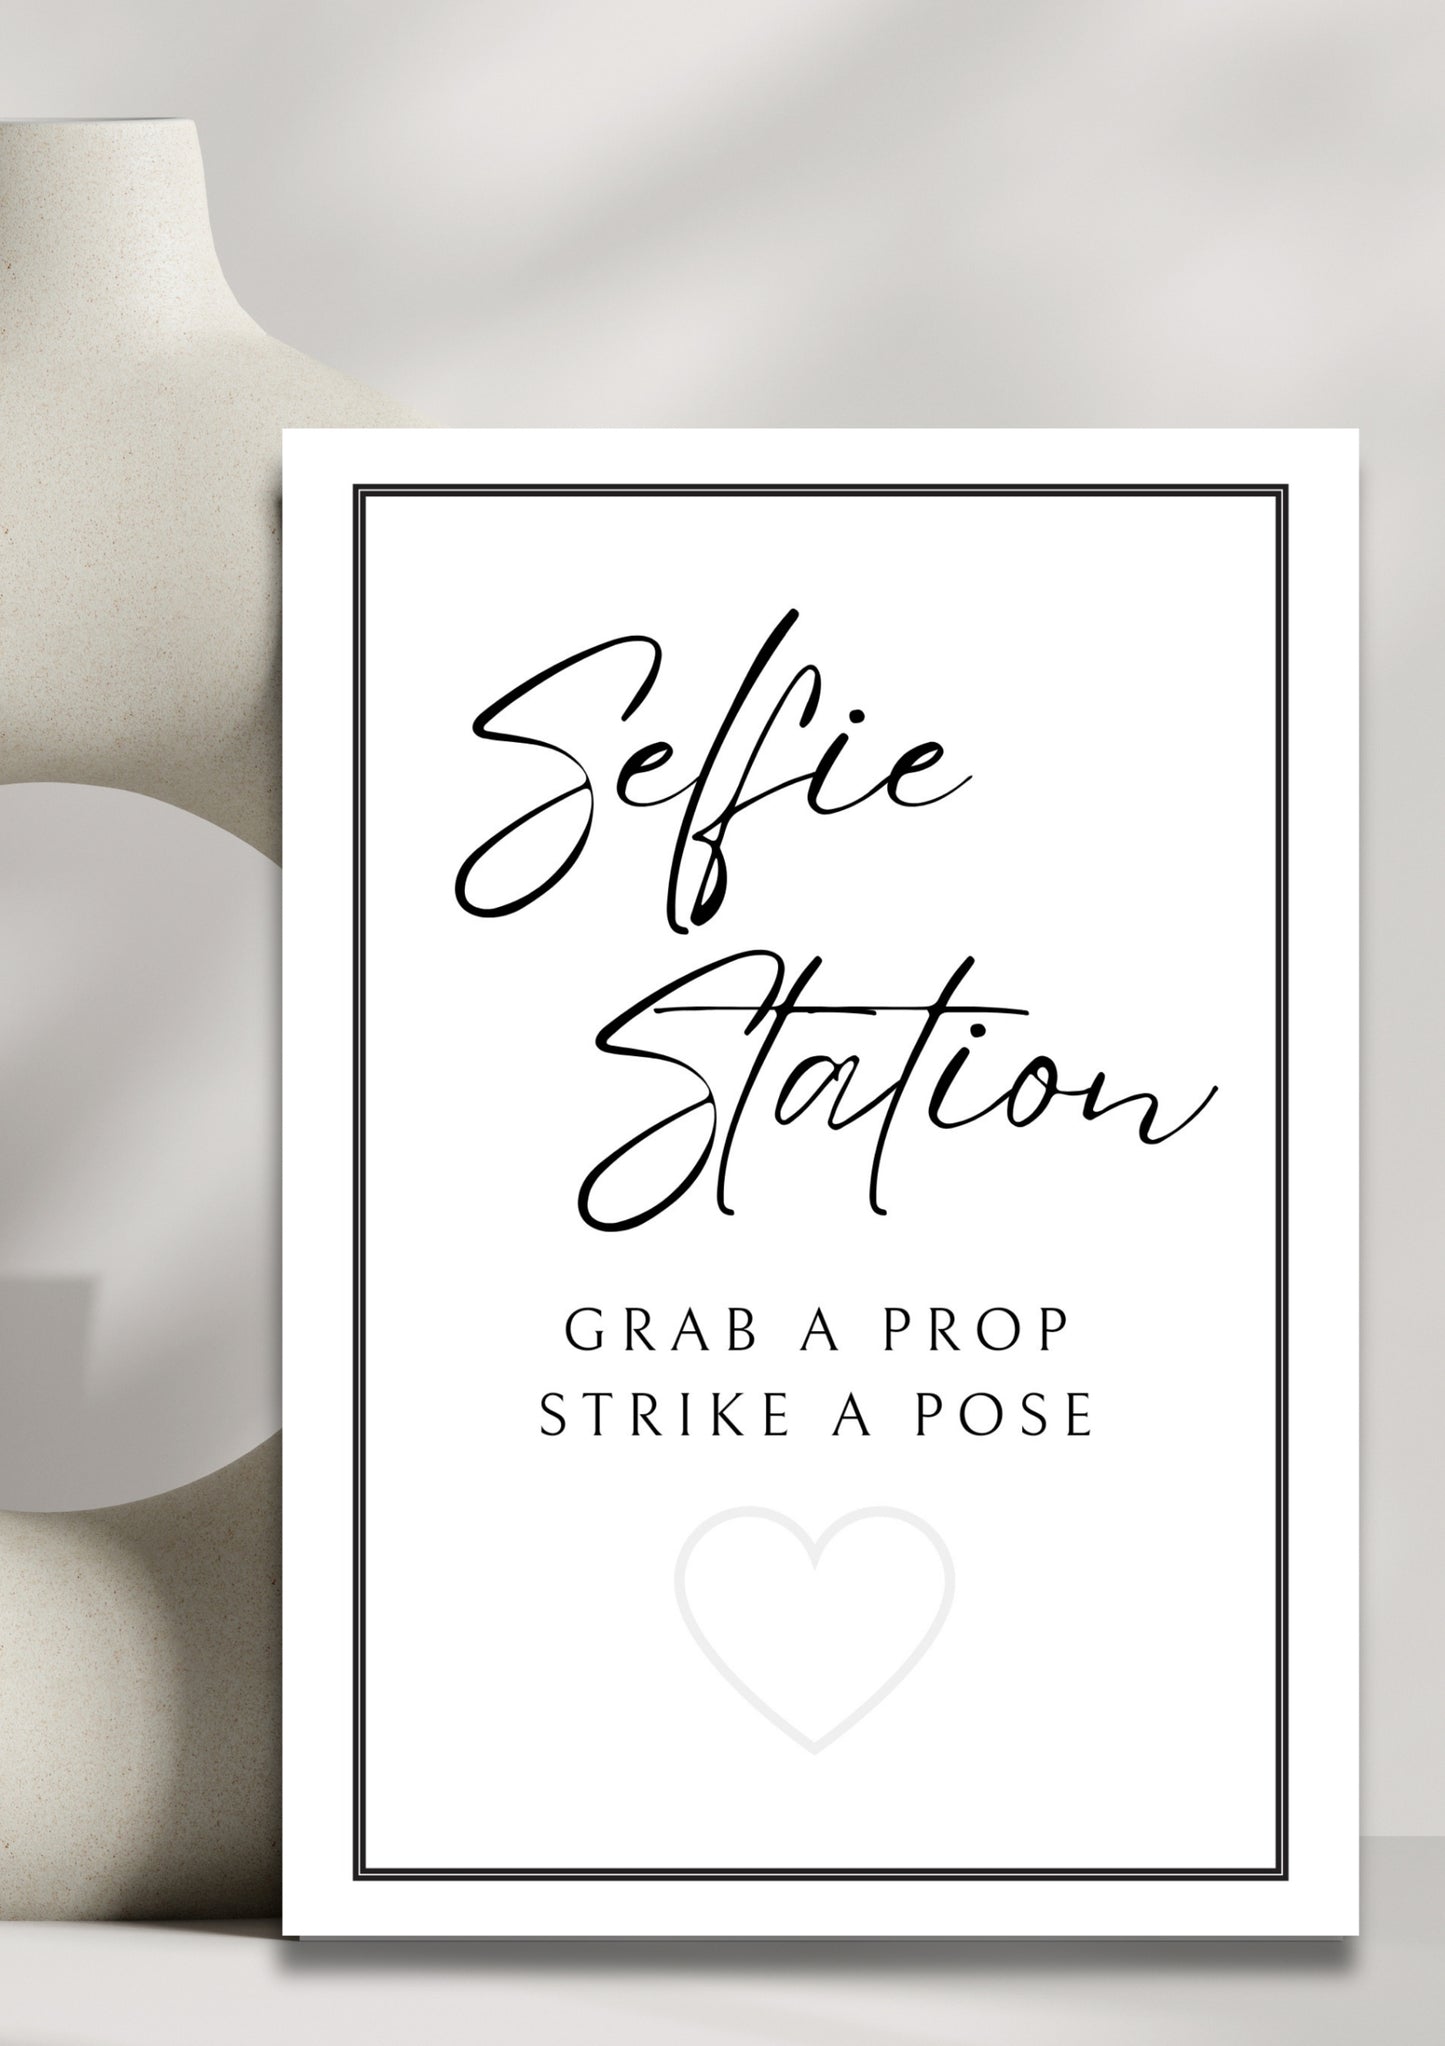 White stone collection - Selfie Station sign